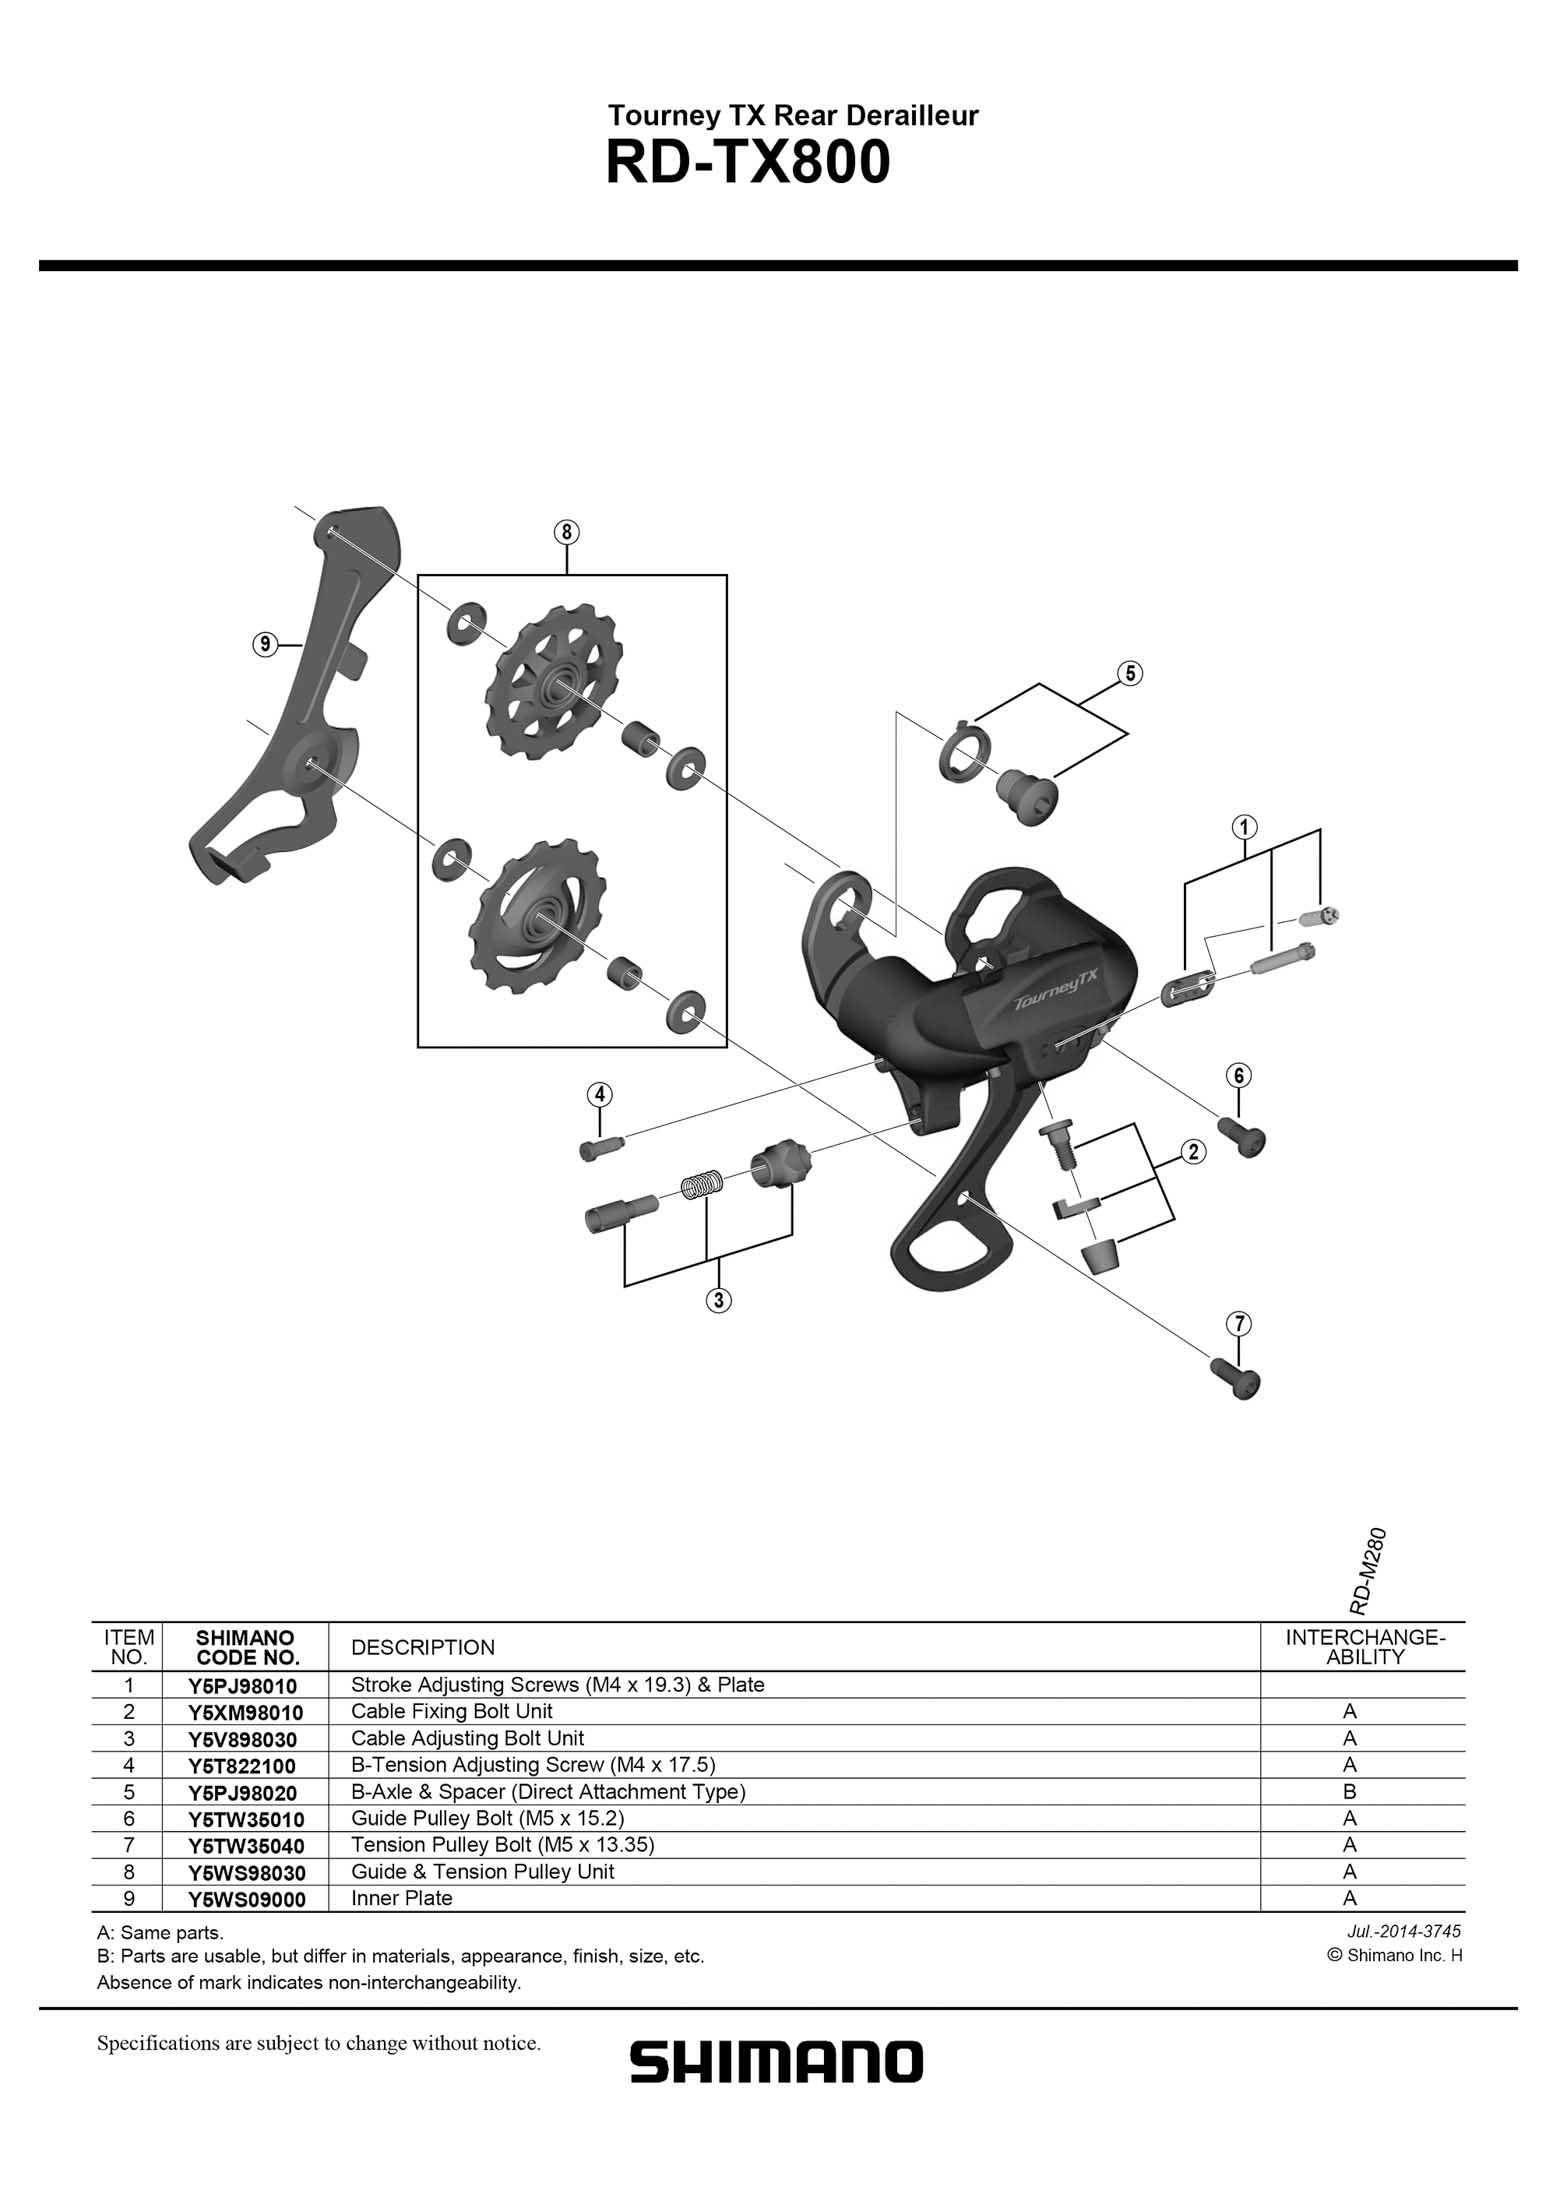 Shimano web site 2020 - exploded views from 2014 Tourney TX (TX800) main image